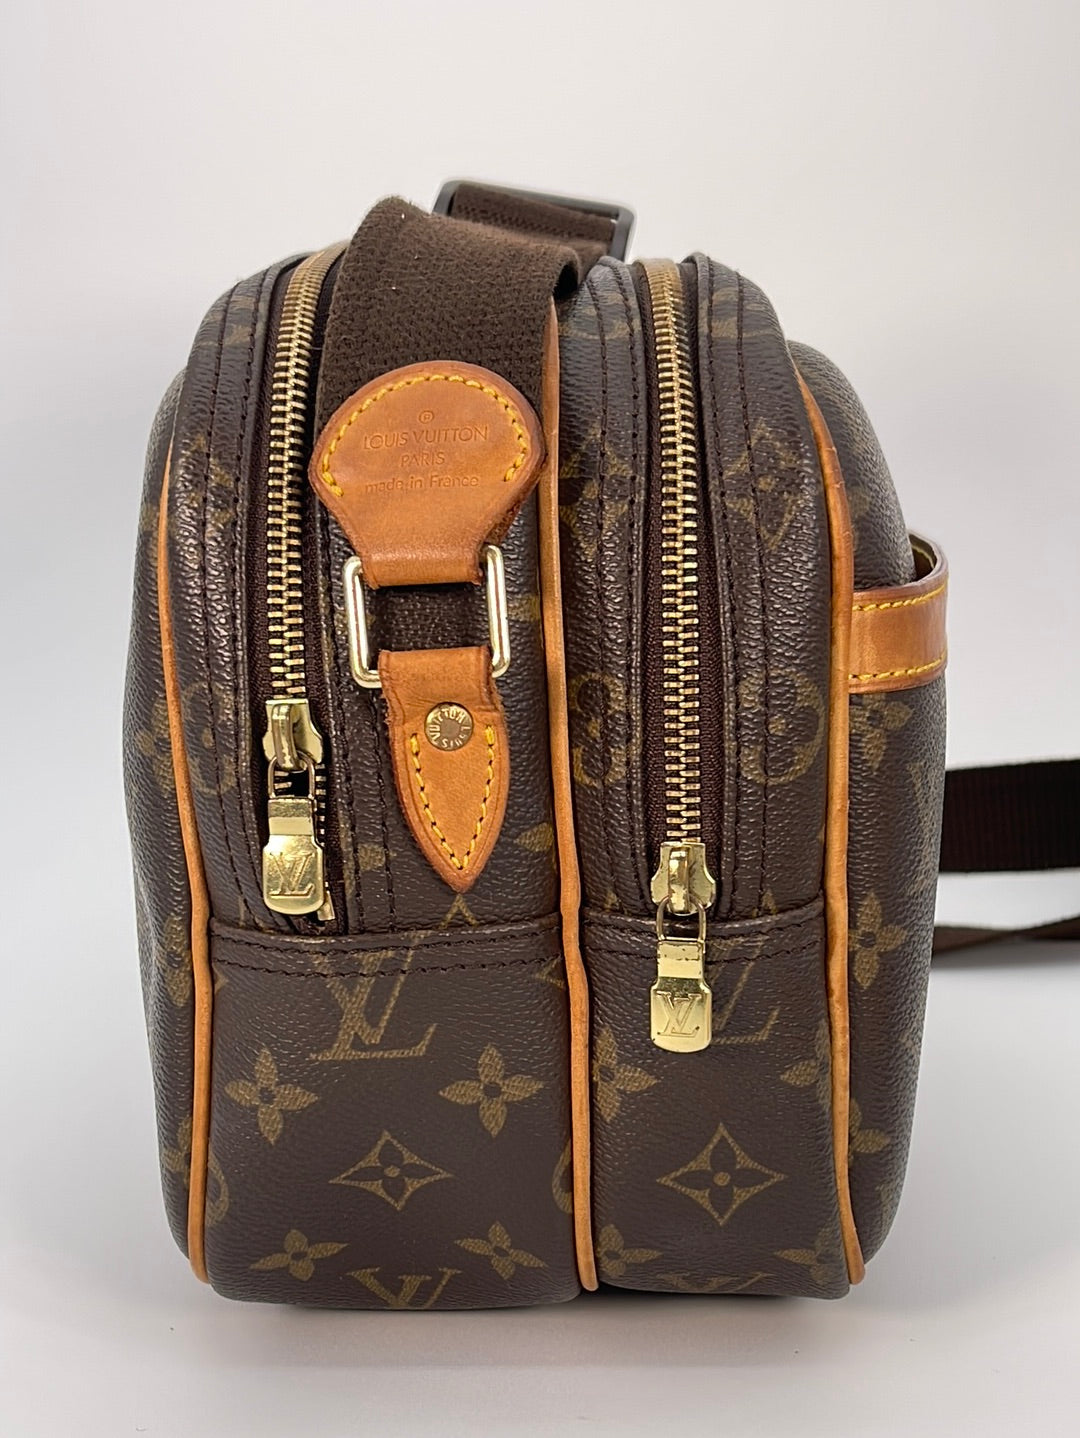 Louis Vuitton 2003 pre-owned Ipanema PM crossbody bag, RvceShops Revival